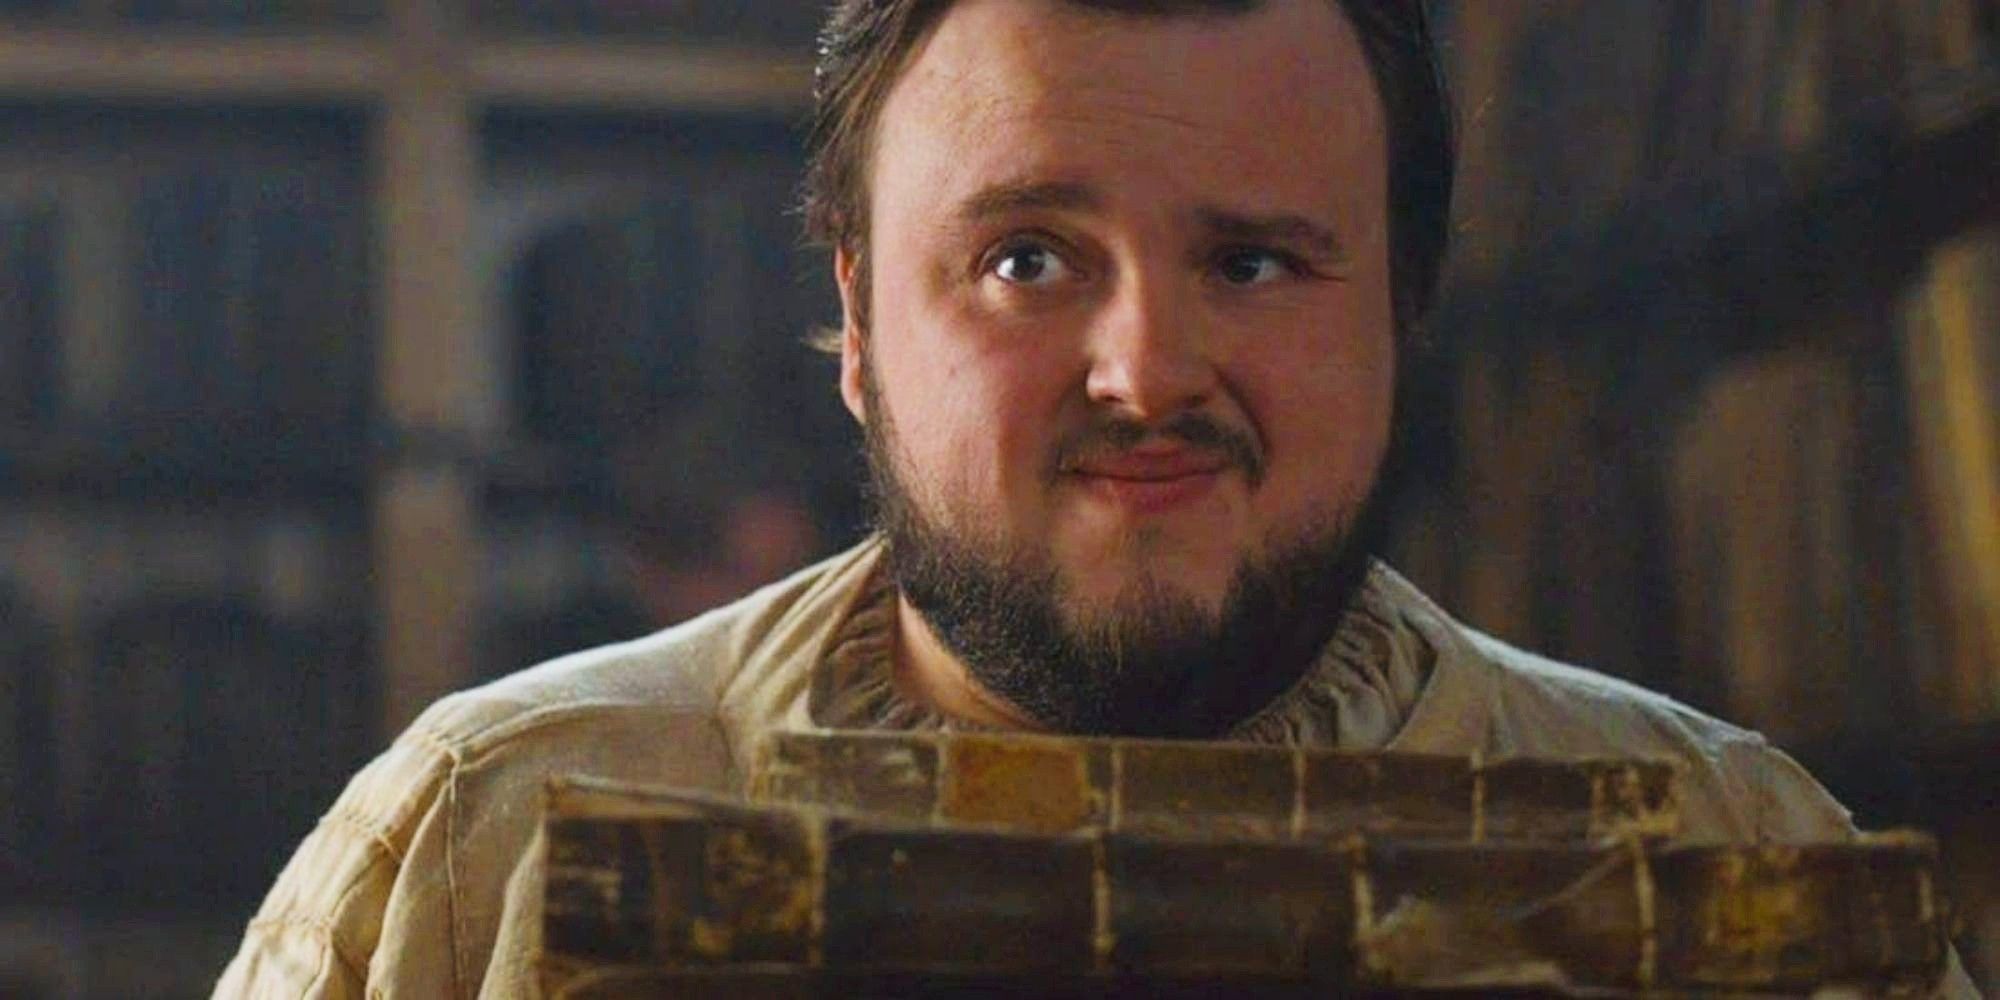 Samwell Tarly holding books at the Citadel in Game of Thrones